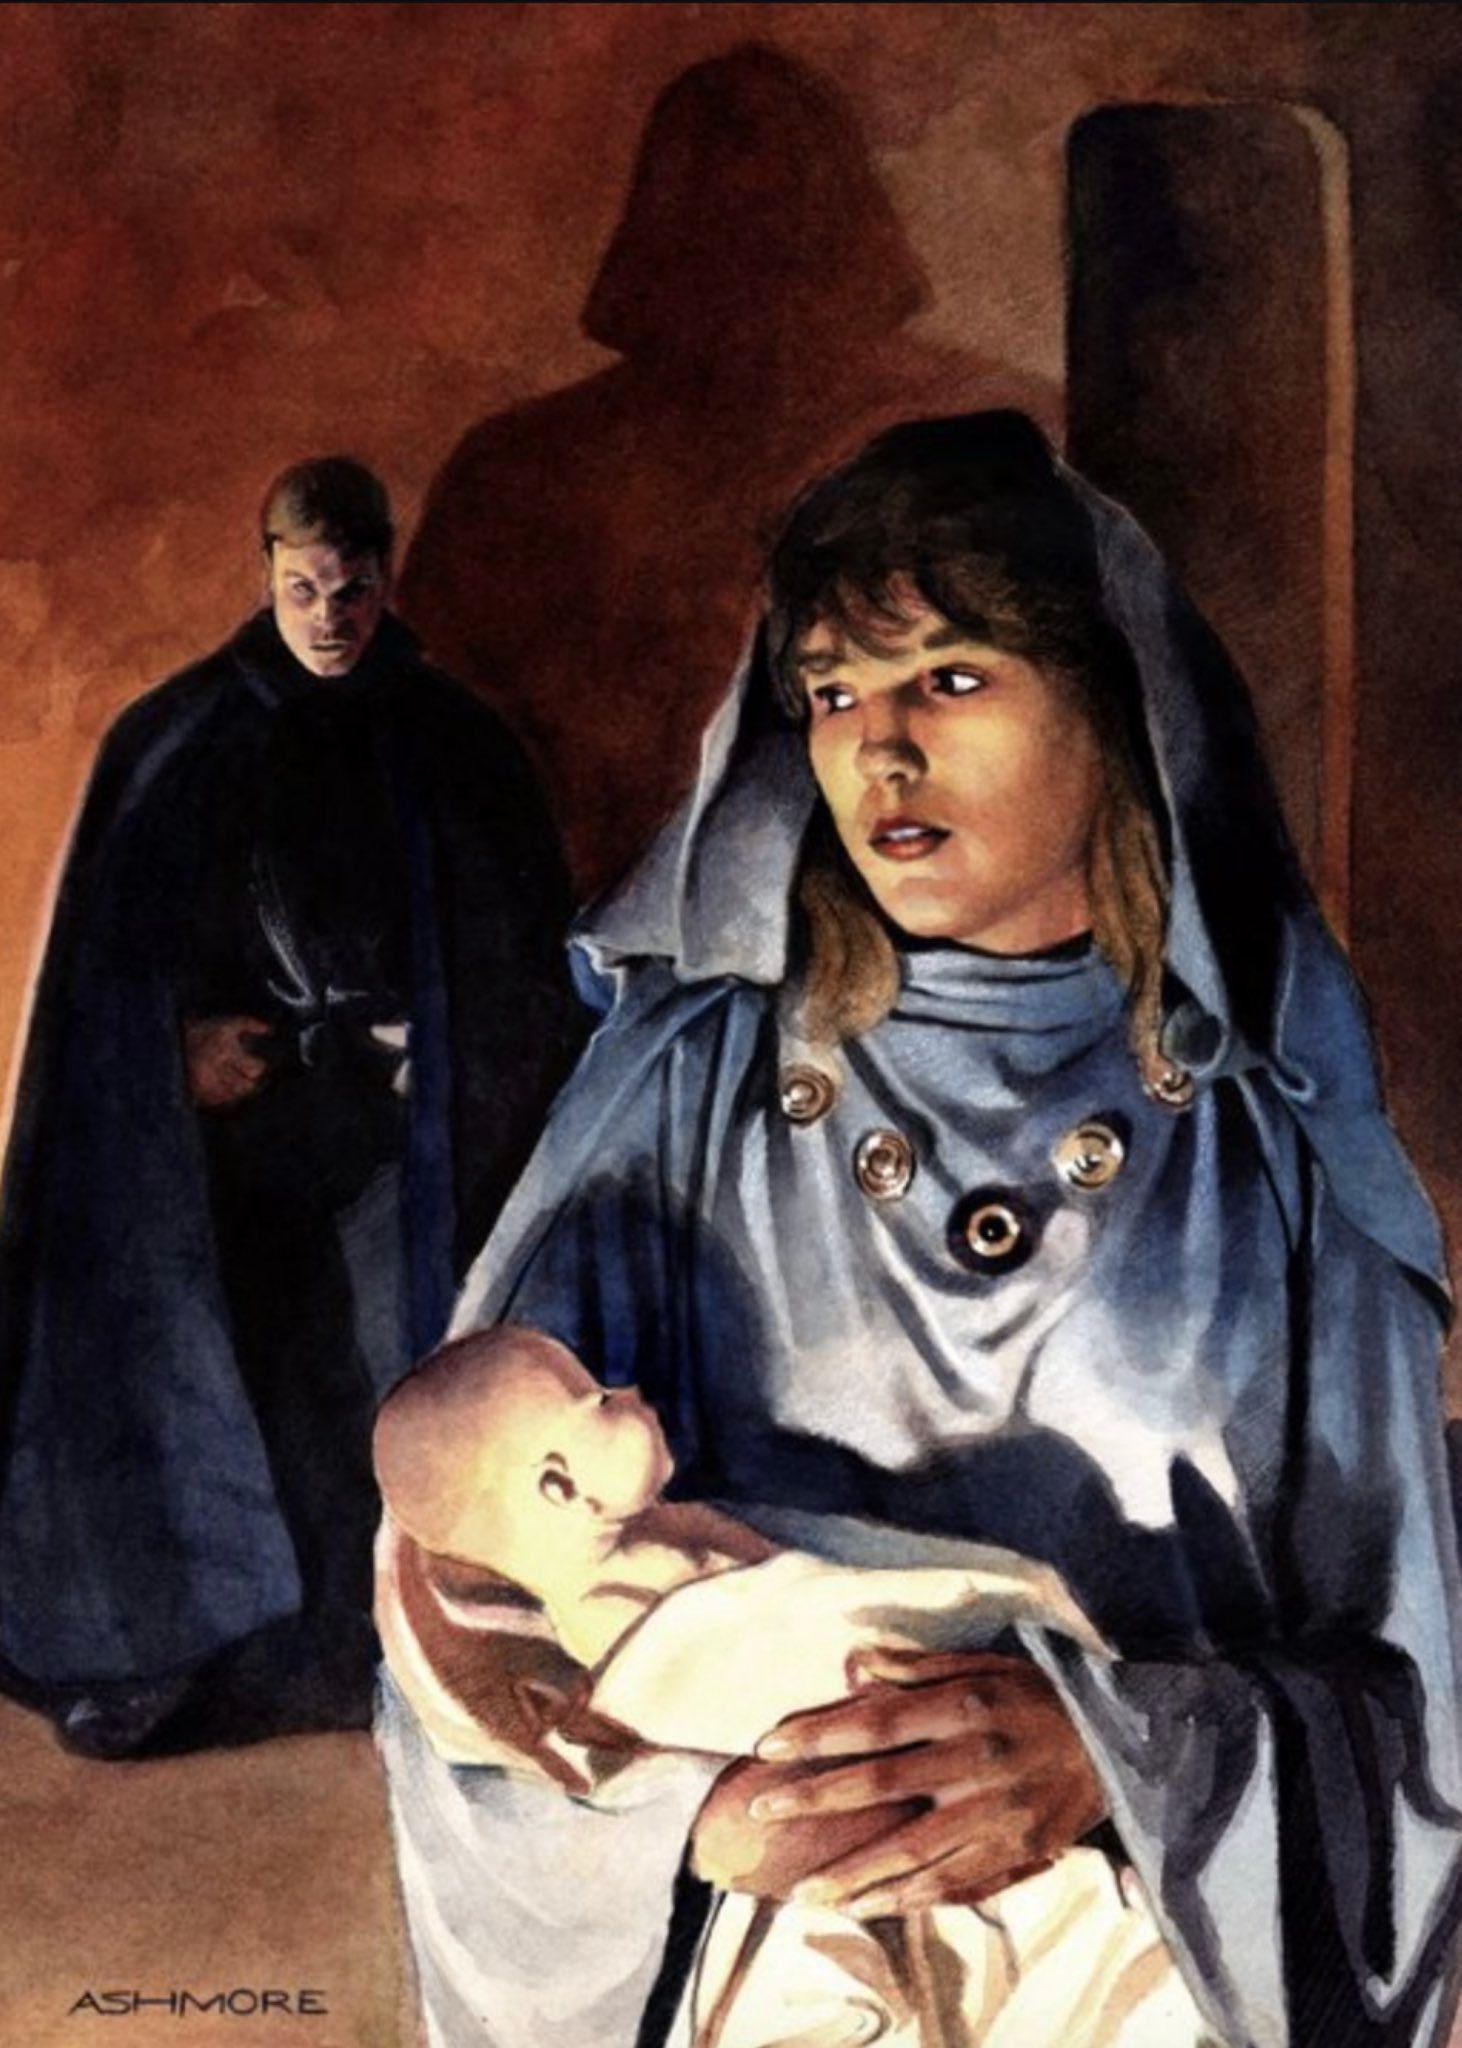 Star Wars artwork depicting an early vision of Padme, Luke Skywalker, and Anakin Skywalker (with the shadow of Darth Vader).